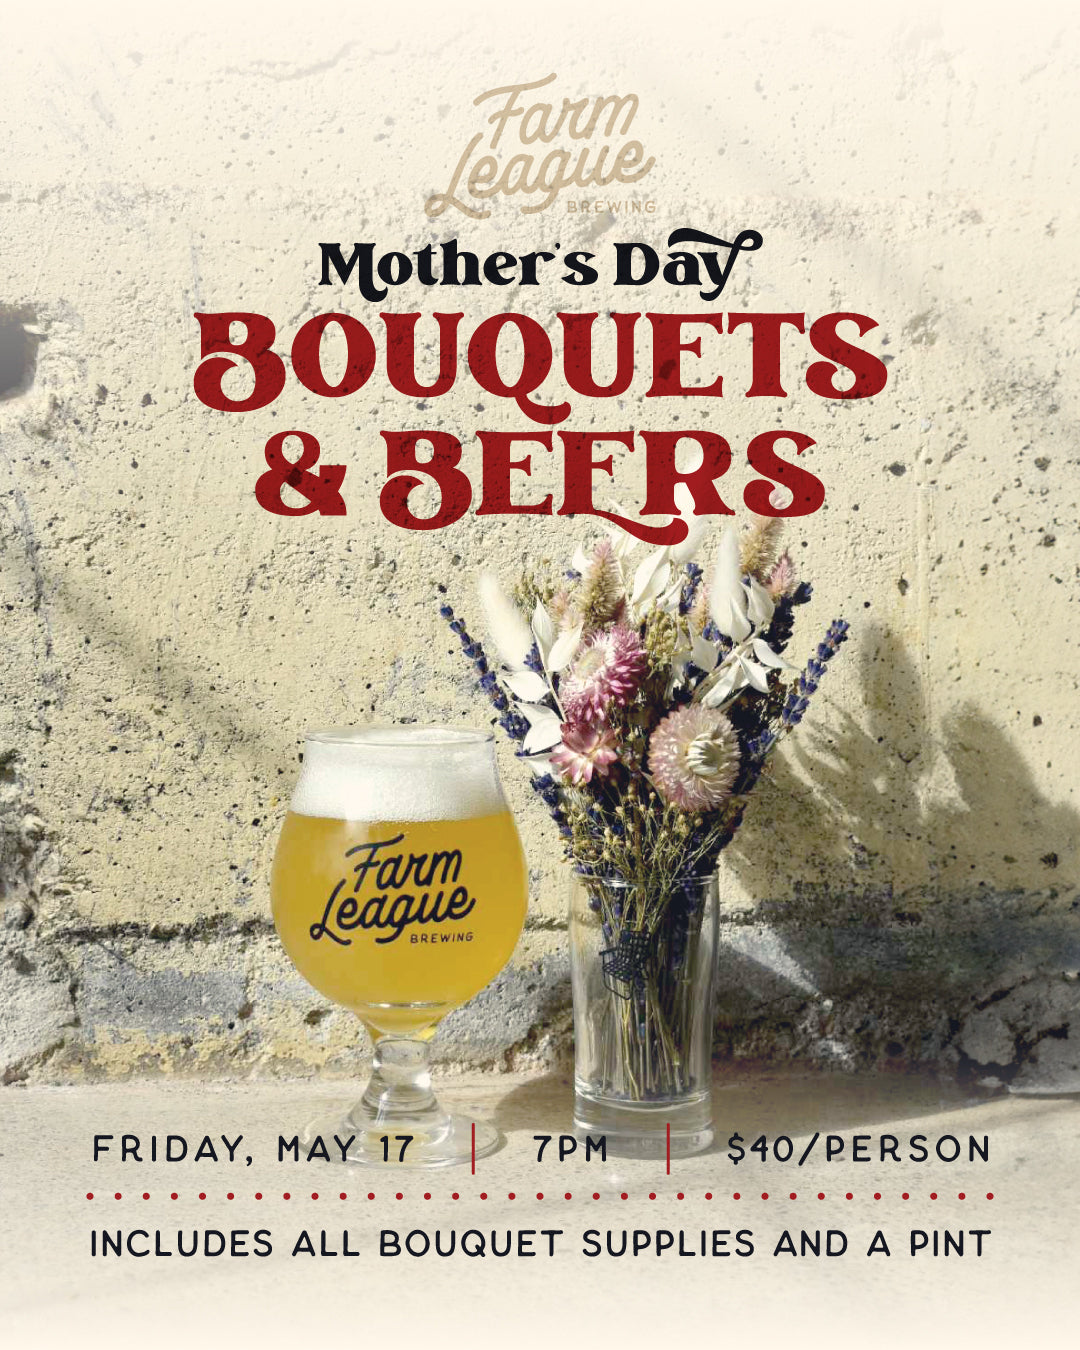 Bouquets-and-Beers-Mothers-Day.jpg__PID:a140df3e-d5a4-496d-9997-61104a463c51